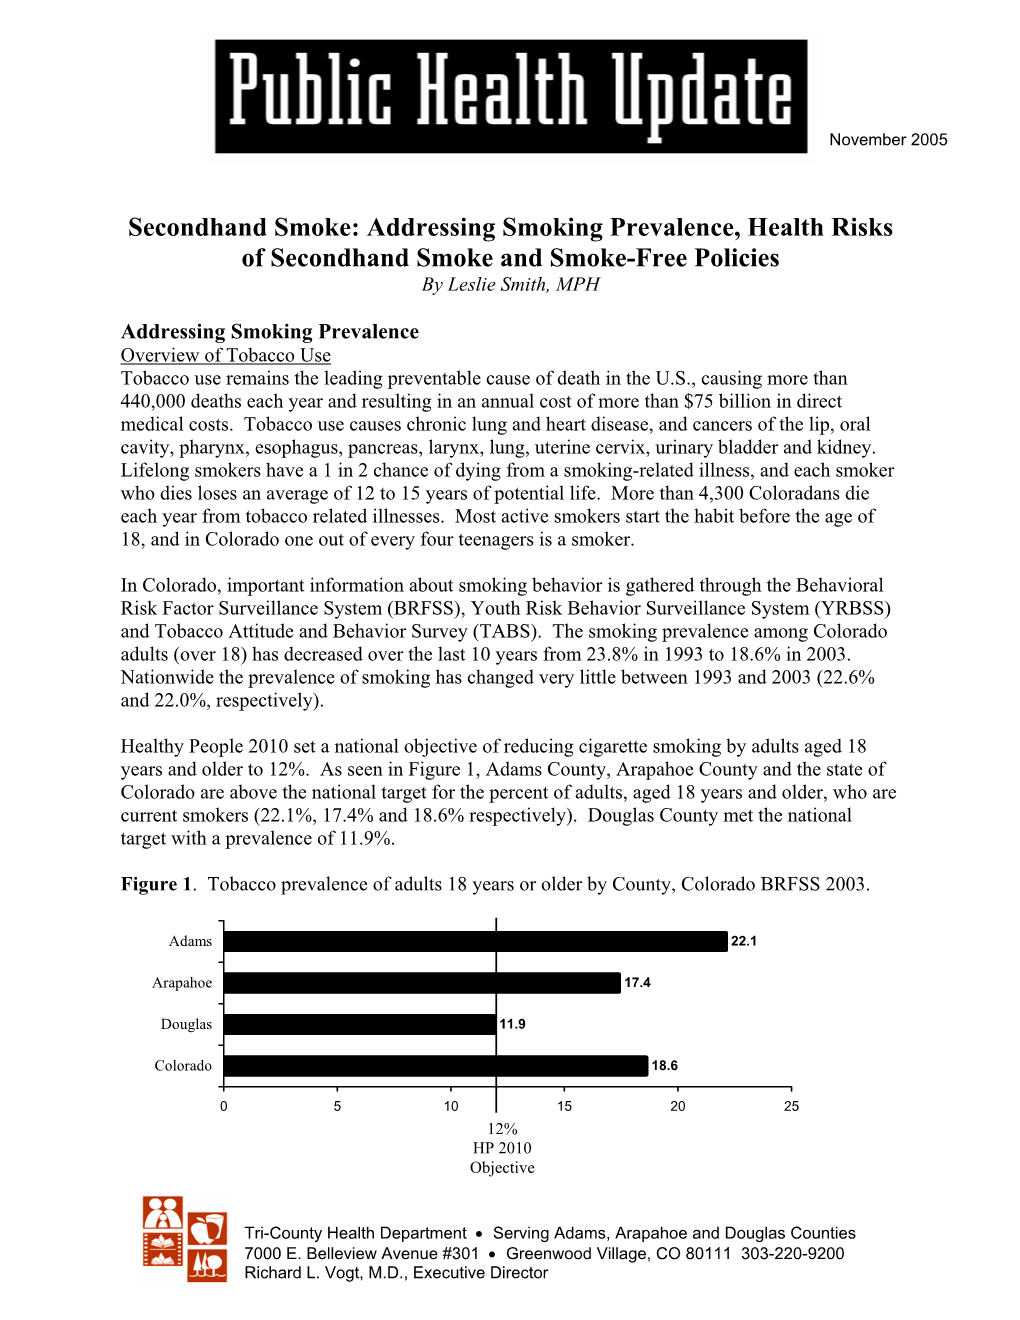 Secondhand Smoke: Addressing Smoking Prevalence, Health Risks of Secondhand Smoke and Smoke-Free Policies by Leslie Smith, MPH